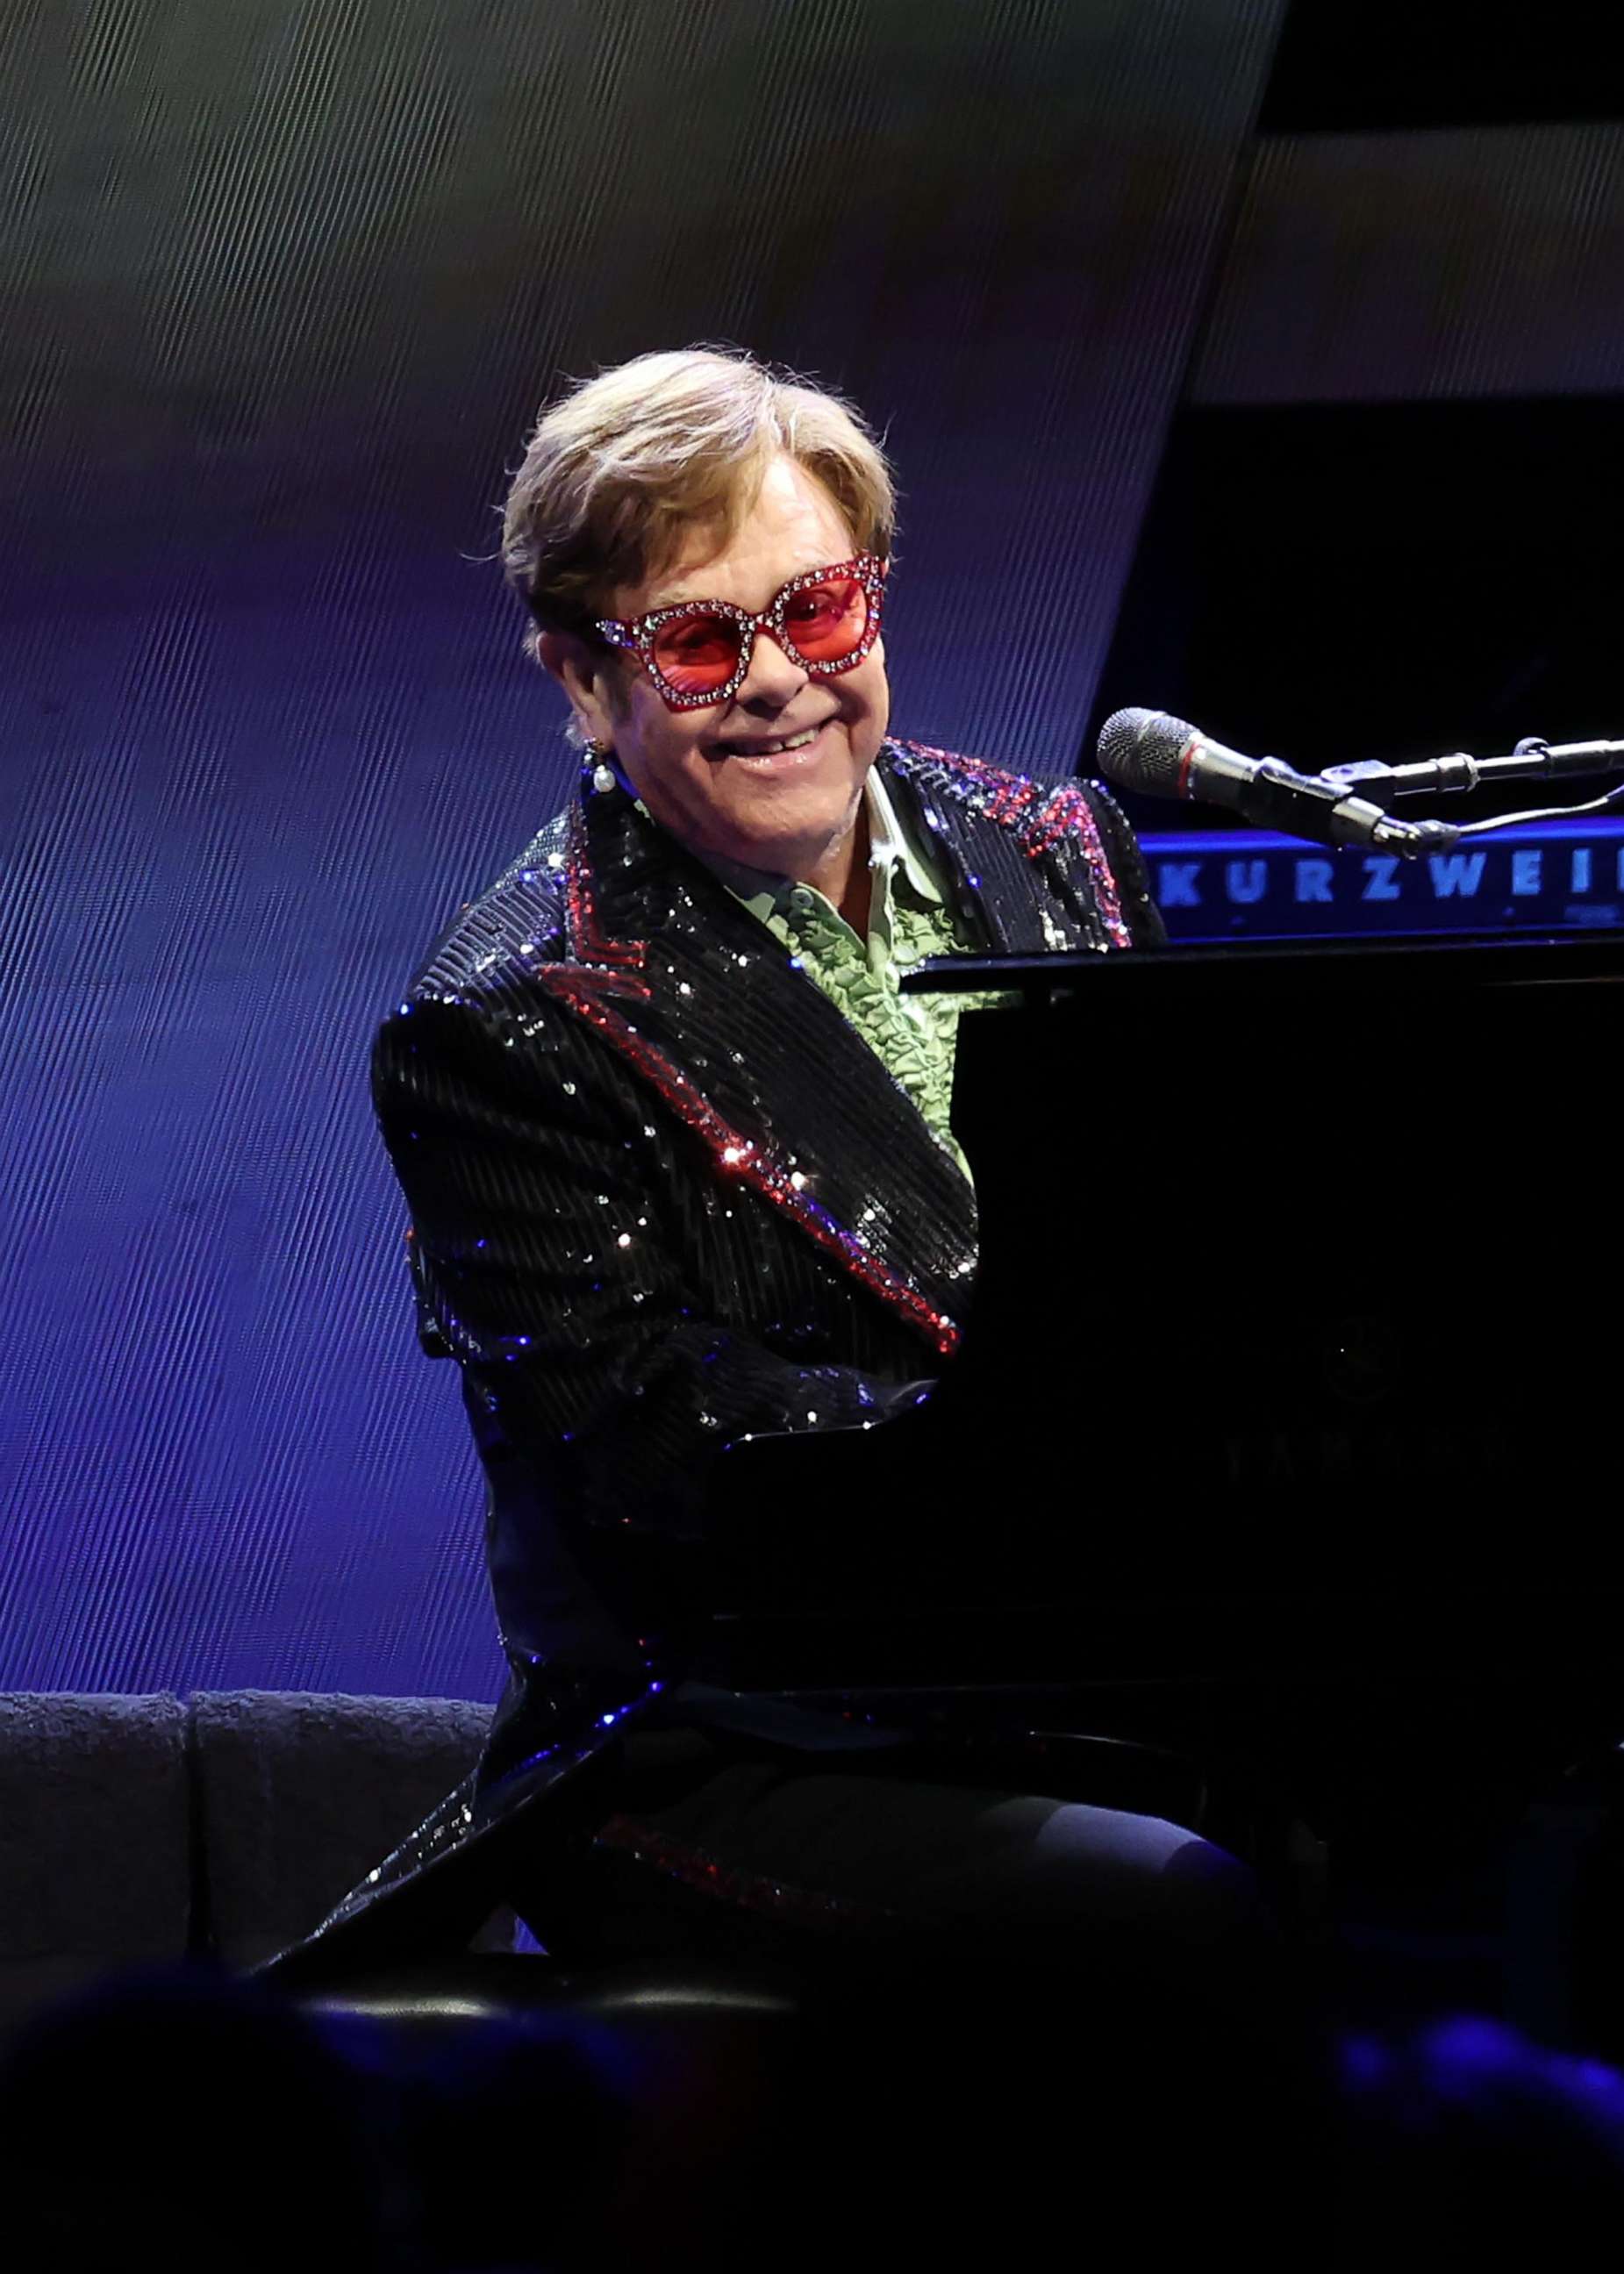 PHOTO: In this April 2, 2023, file photo, Sir Elton John performs live on stage during his "Farewell Yellow Brick Road" Tour in London.